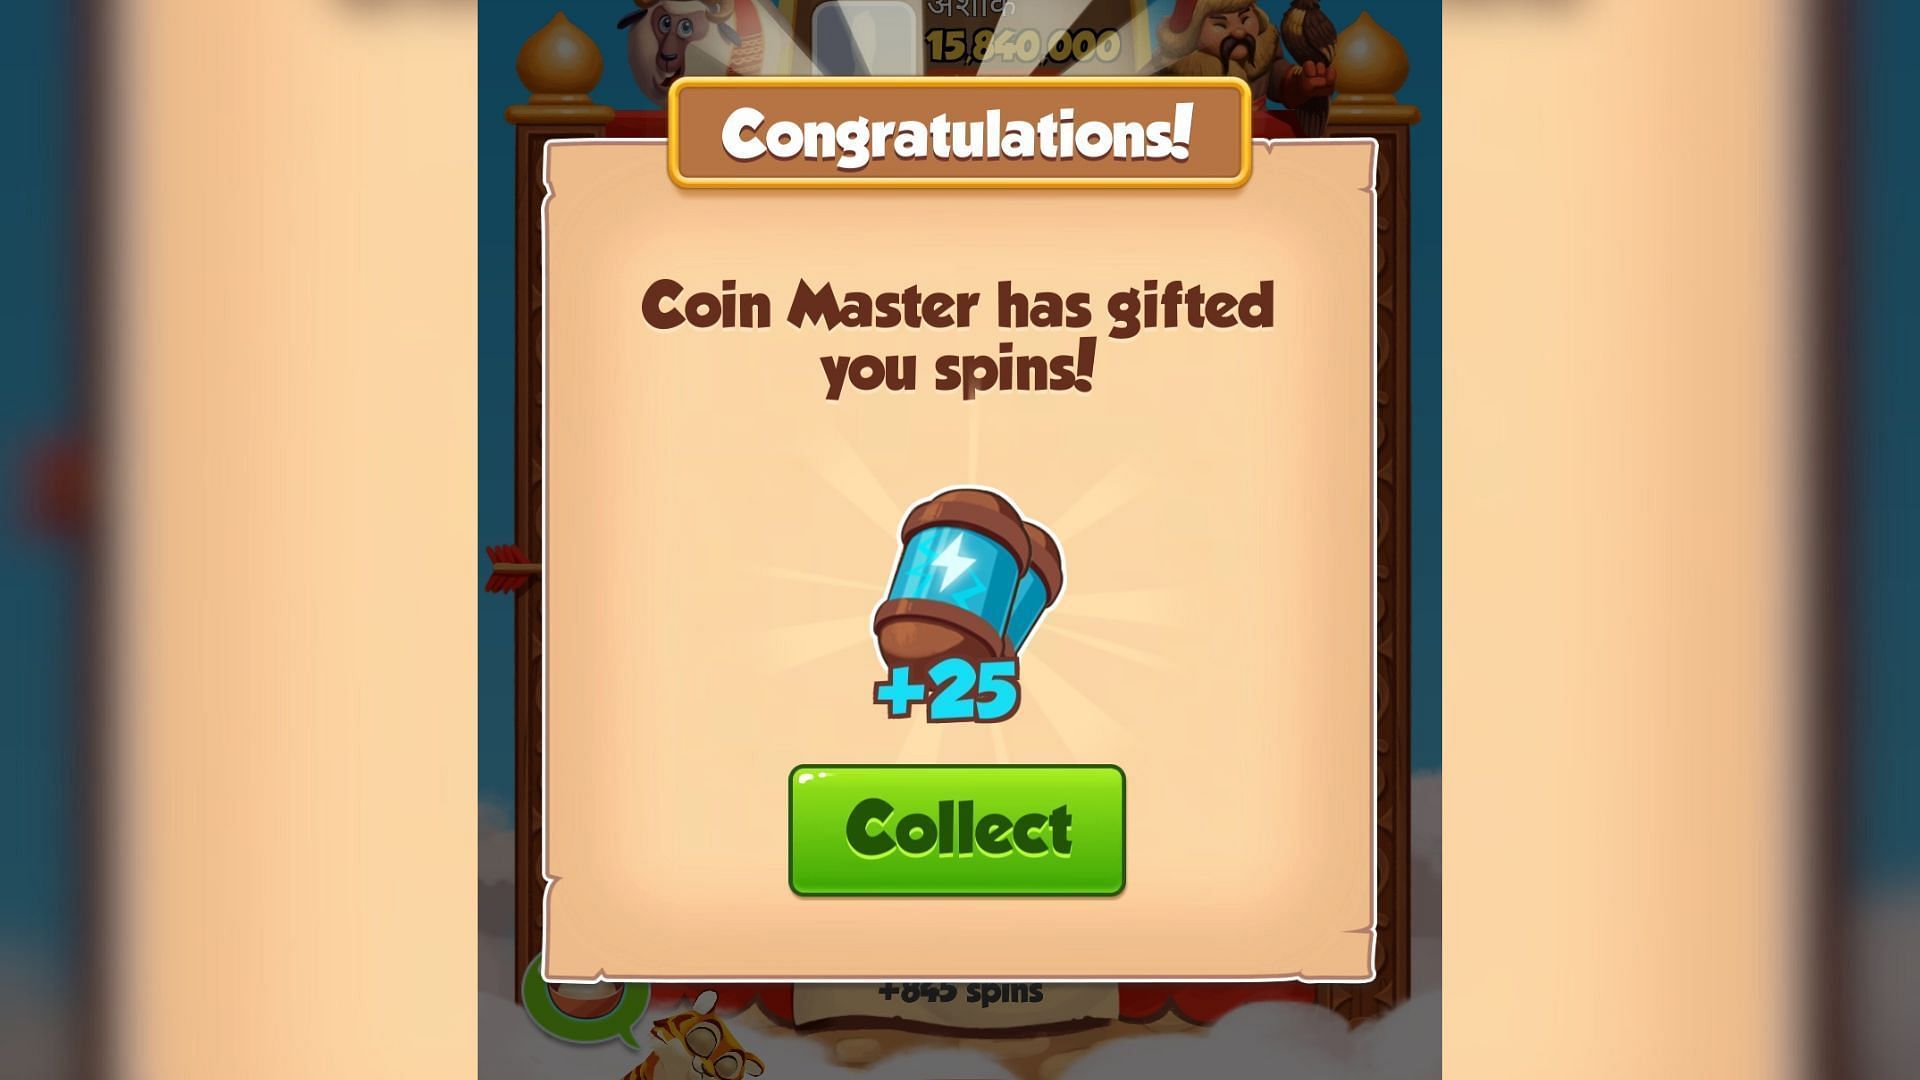 Get Coin Master free spins by redeeming daily links. (Image via Moon Active)